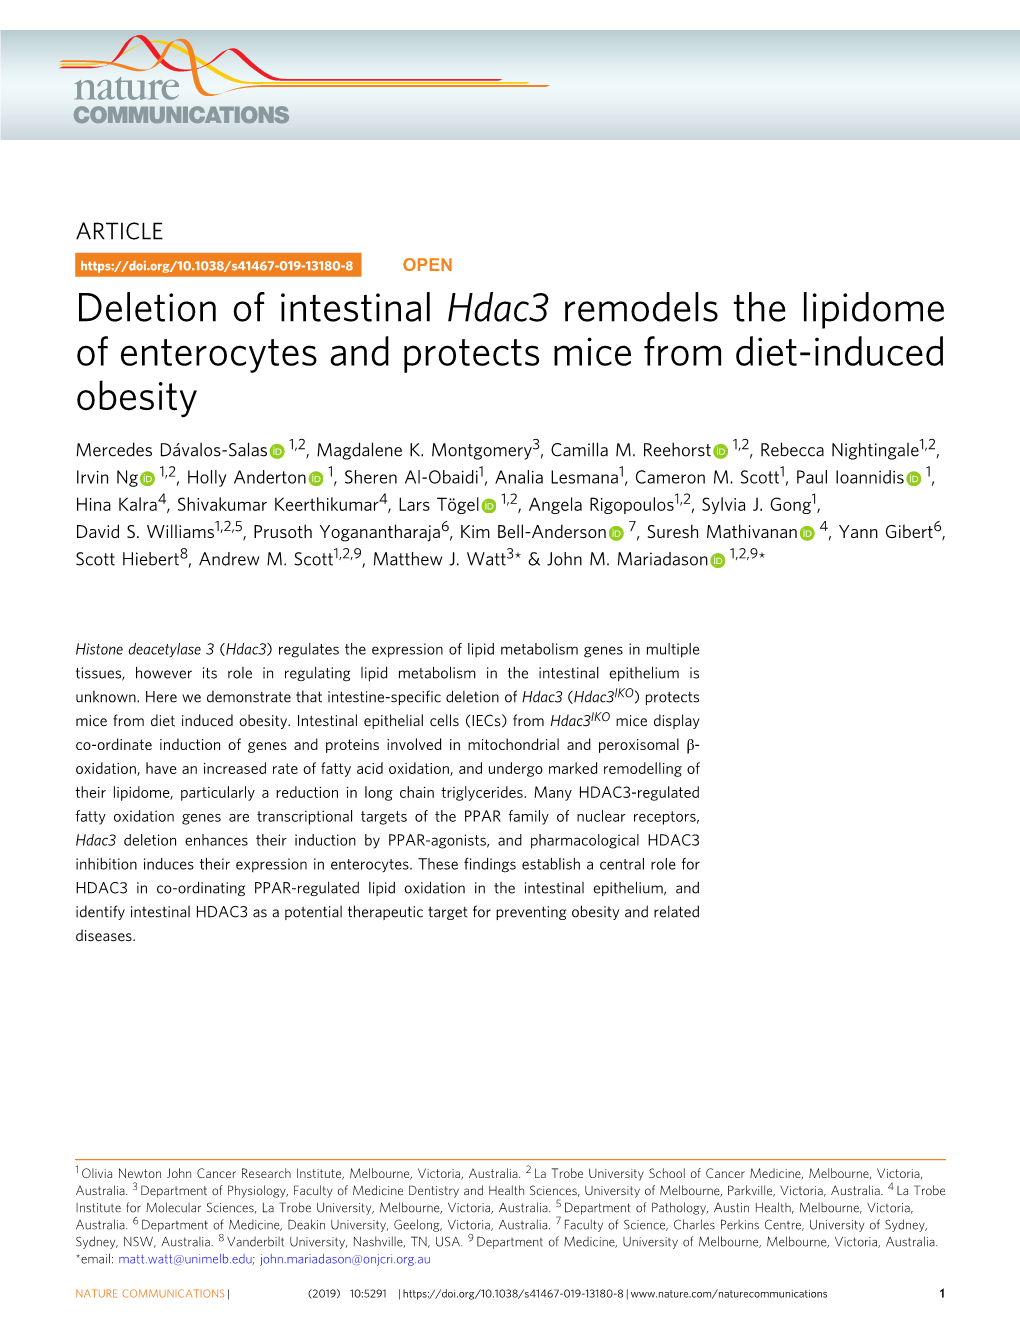 Deletion of Intestinal Hdac3 Remodels the Lipidome of Enterocytes and Protects Mice from Diet-Induced Obesity